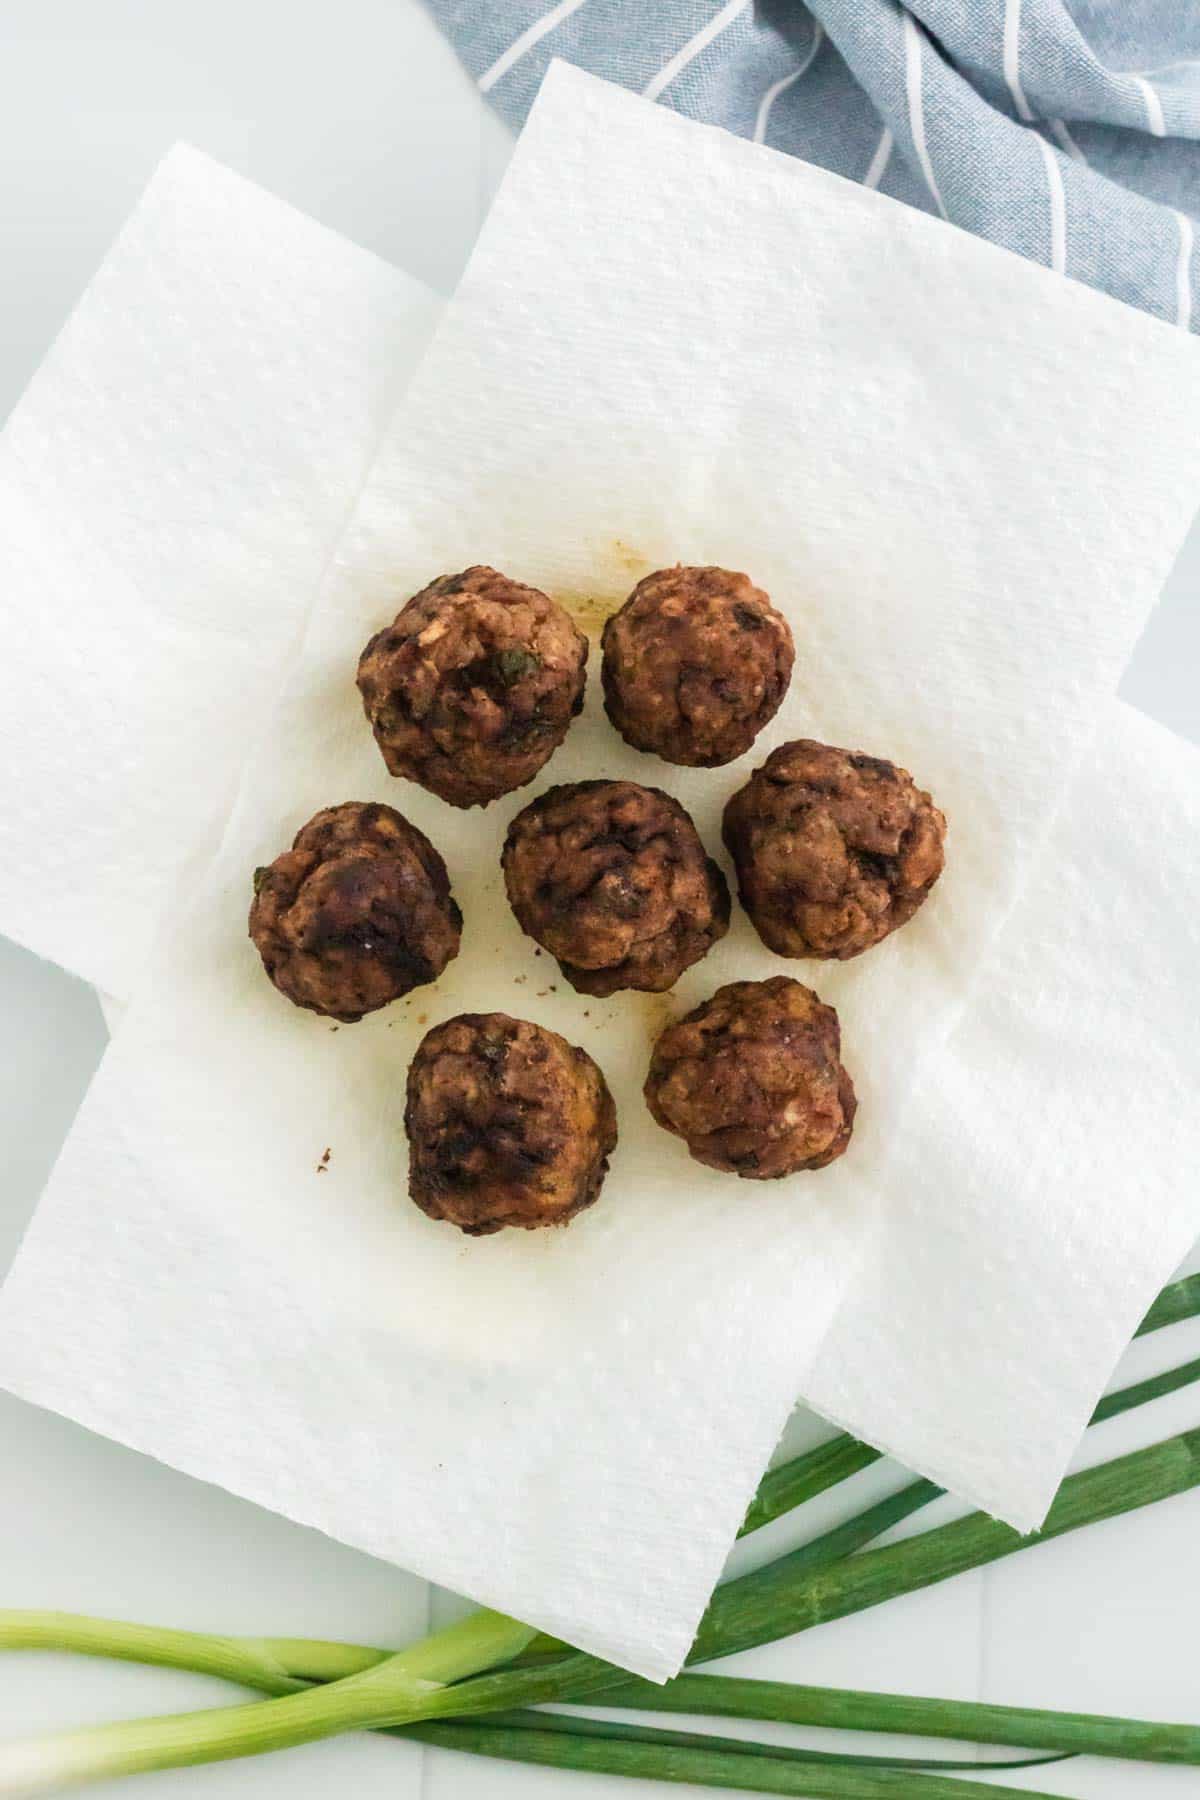 Seven fully cooked pork meatballs sitting on paper towels to drain